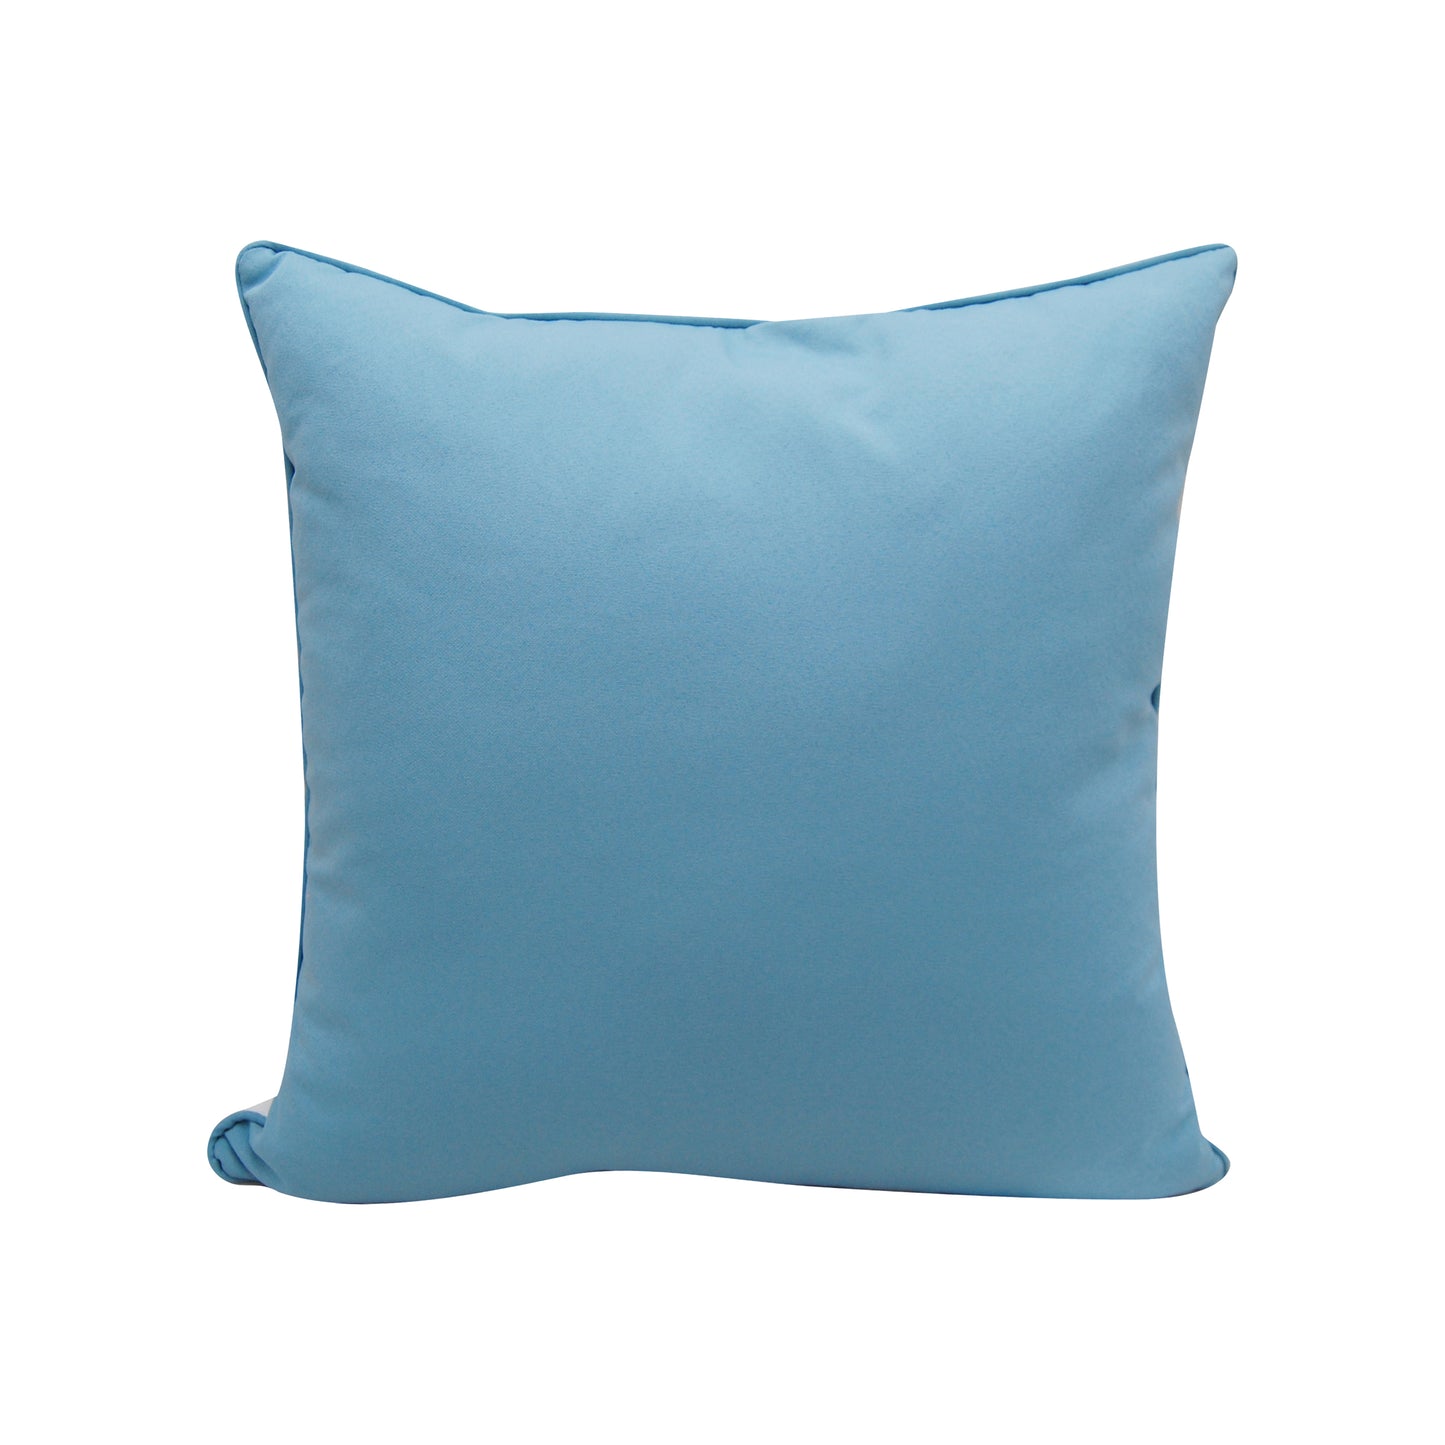 Solid blue fabric; back of Sea Glass Tribal Crab pillow.